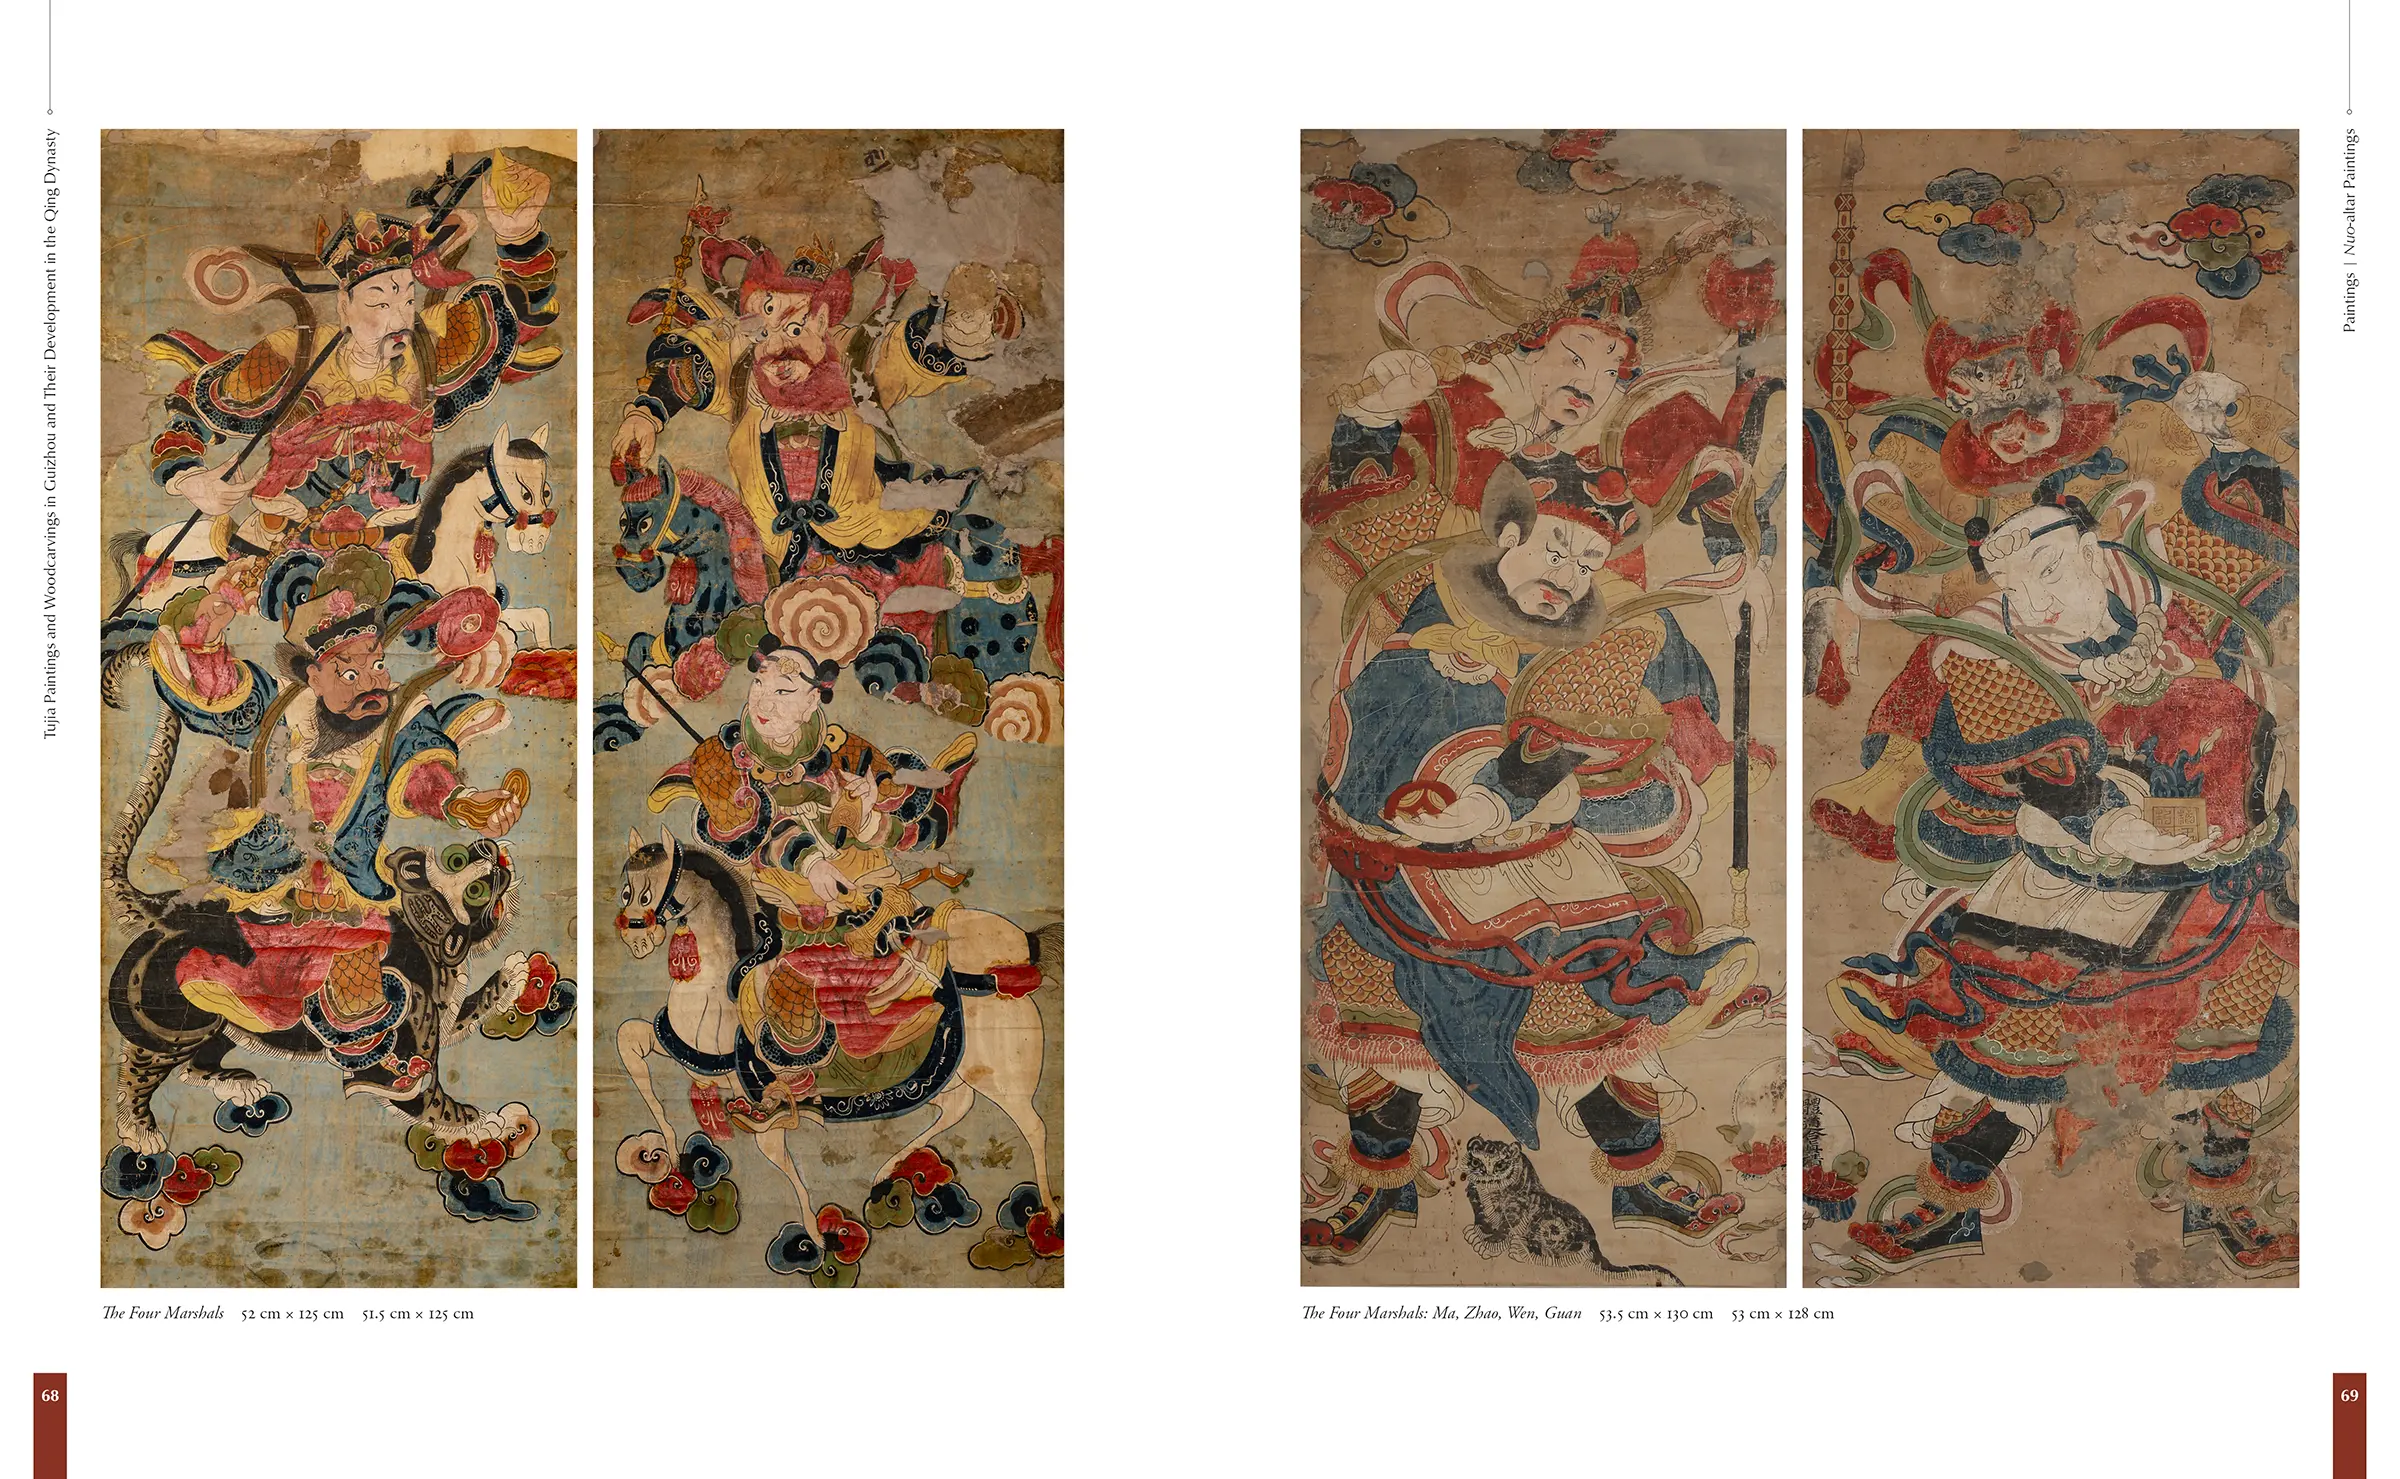 Tujia Paintings and Woodcarvings in Guizhou and Their Development in the Qing Dynasty_interior pages